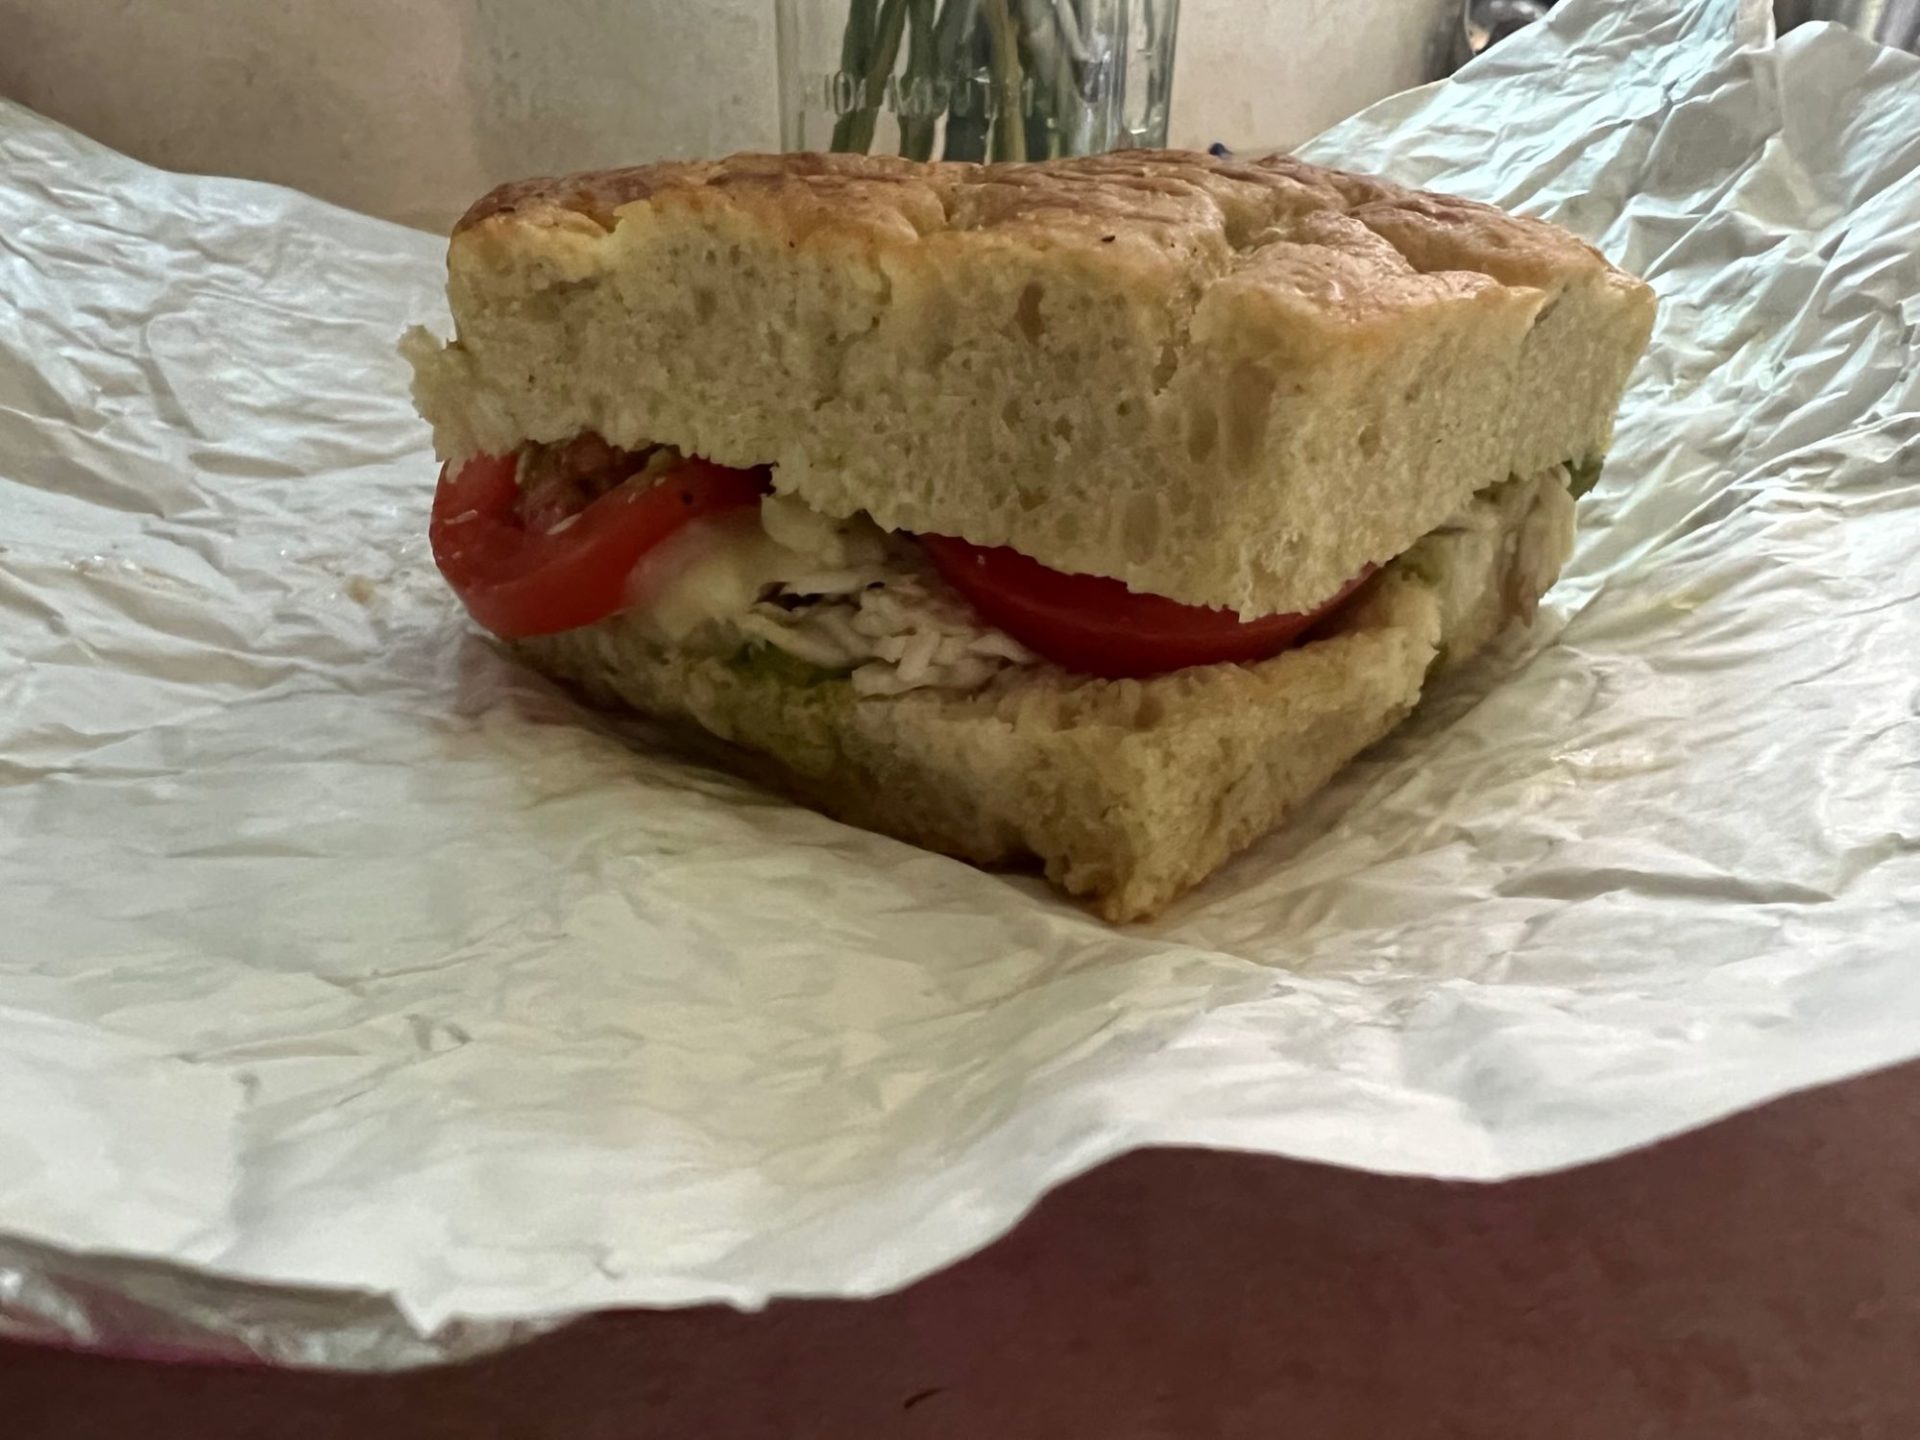 A sandwich with thick focaccia bread, turkey, and tomatoes is sitting on a white wrapper.